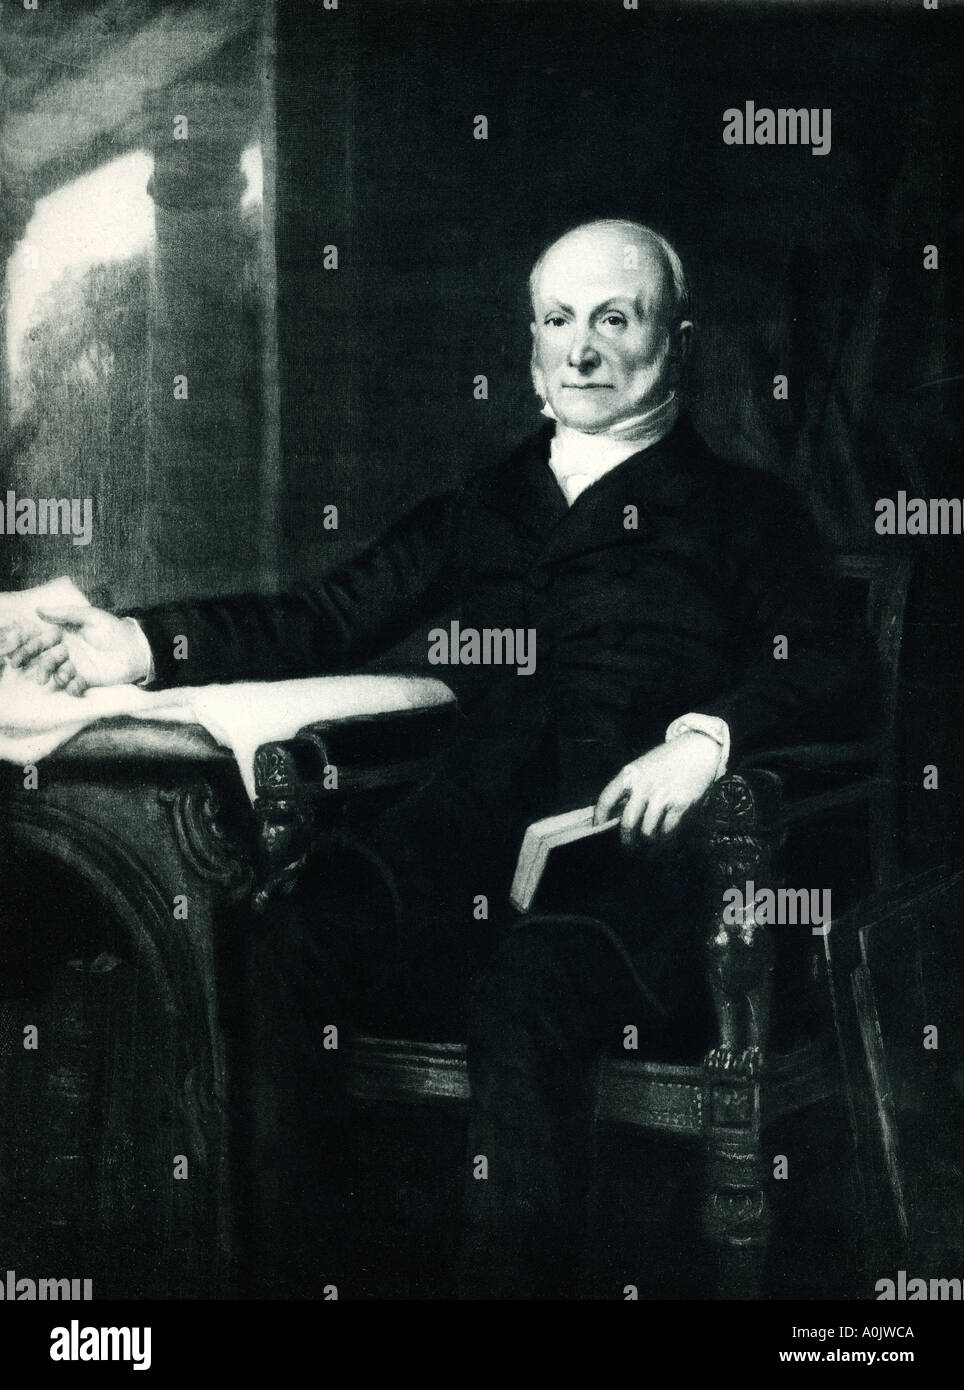 John Quincy Adams, 1767 - 1848.   American statesman, diplomat, lawyer, diarist and 6th President of the United States. Stock Photo